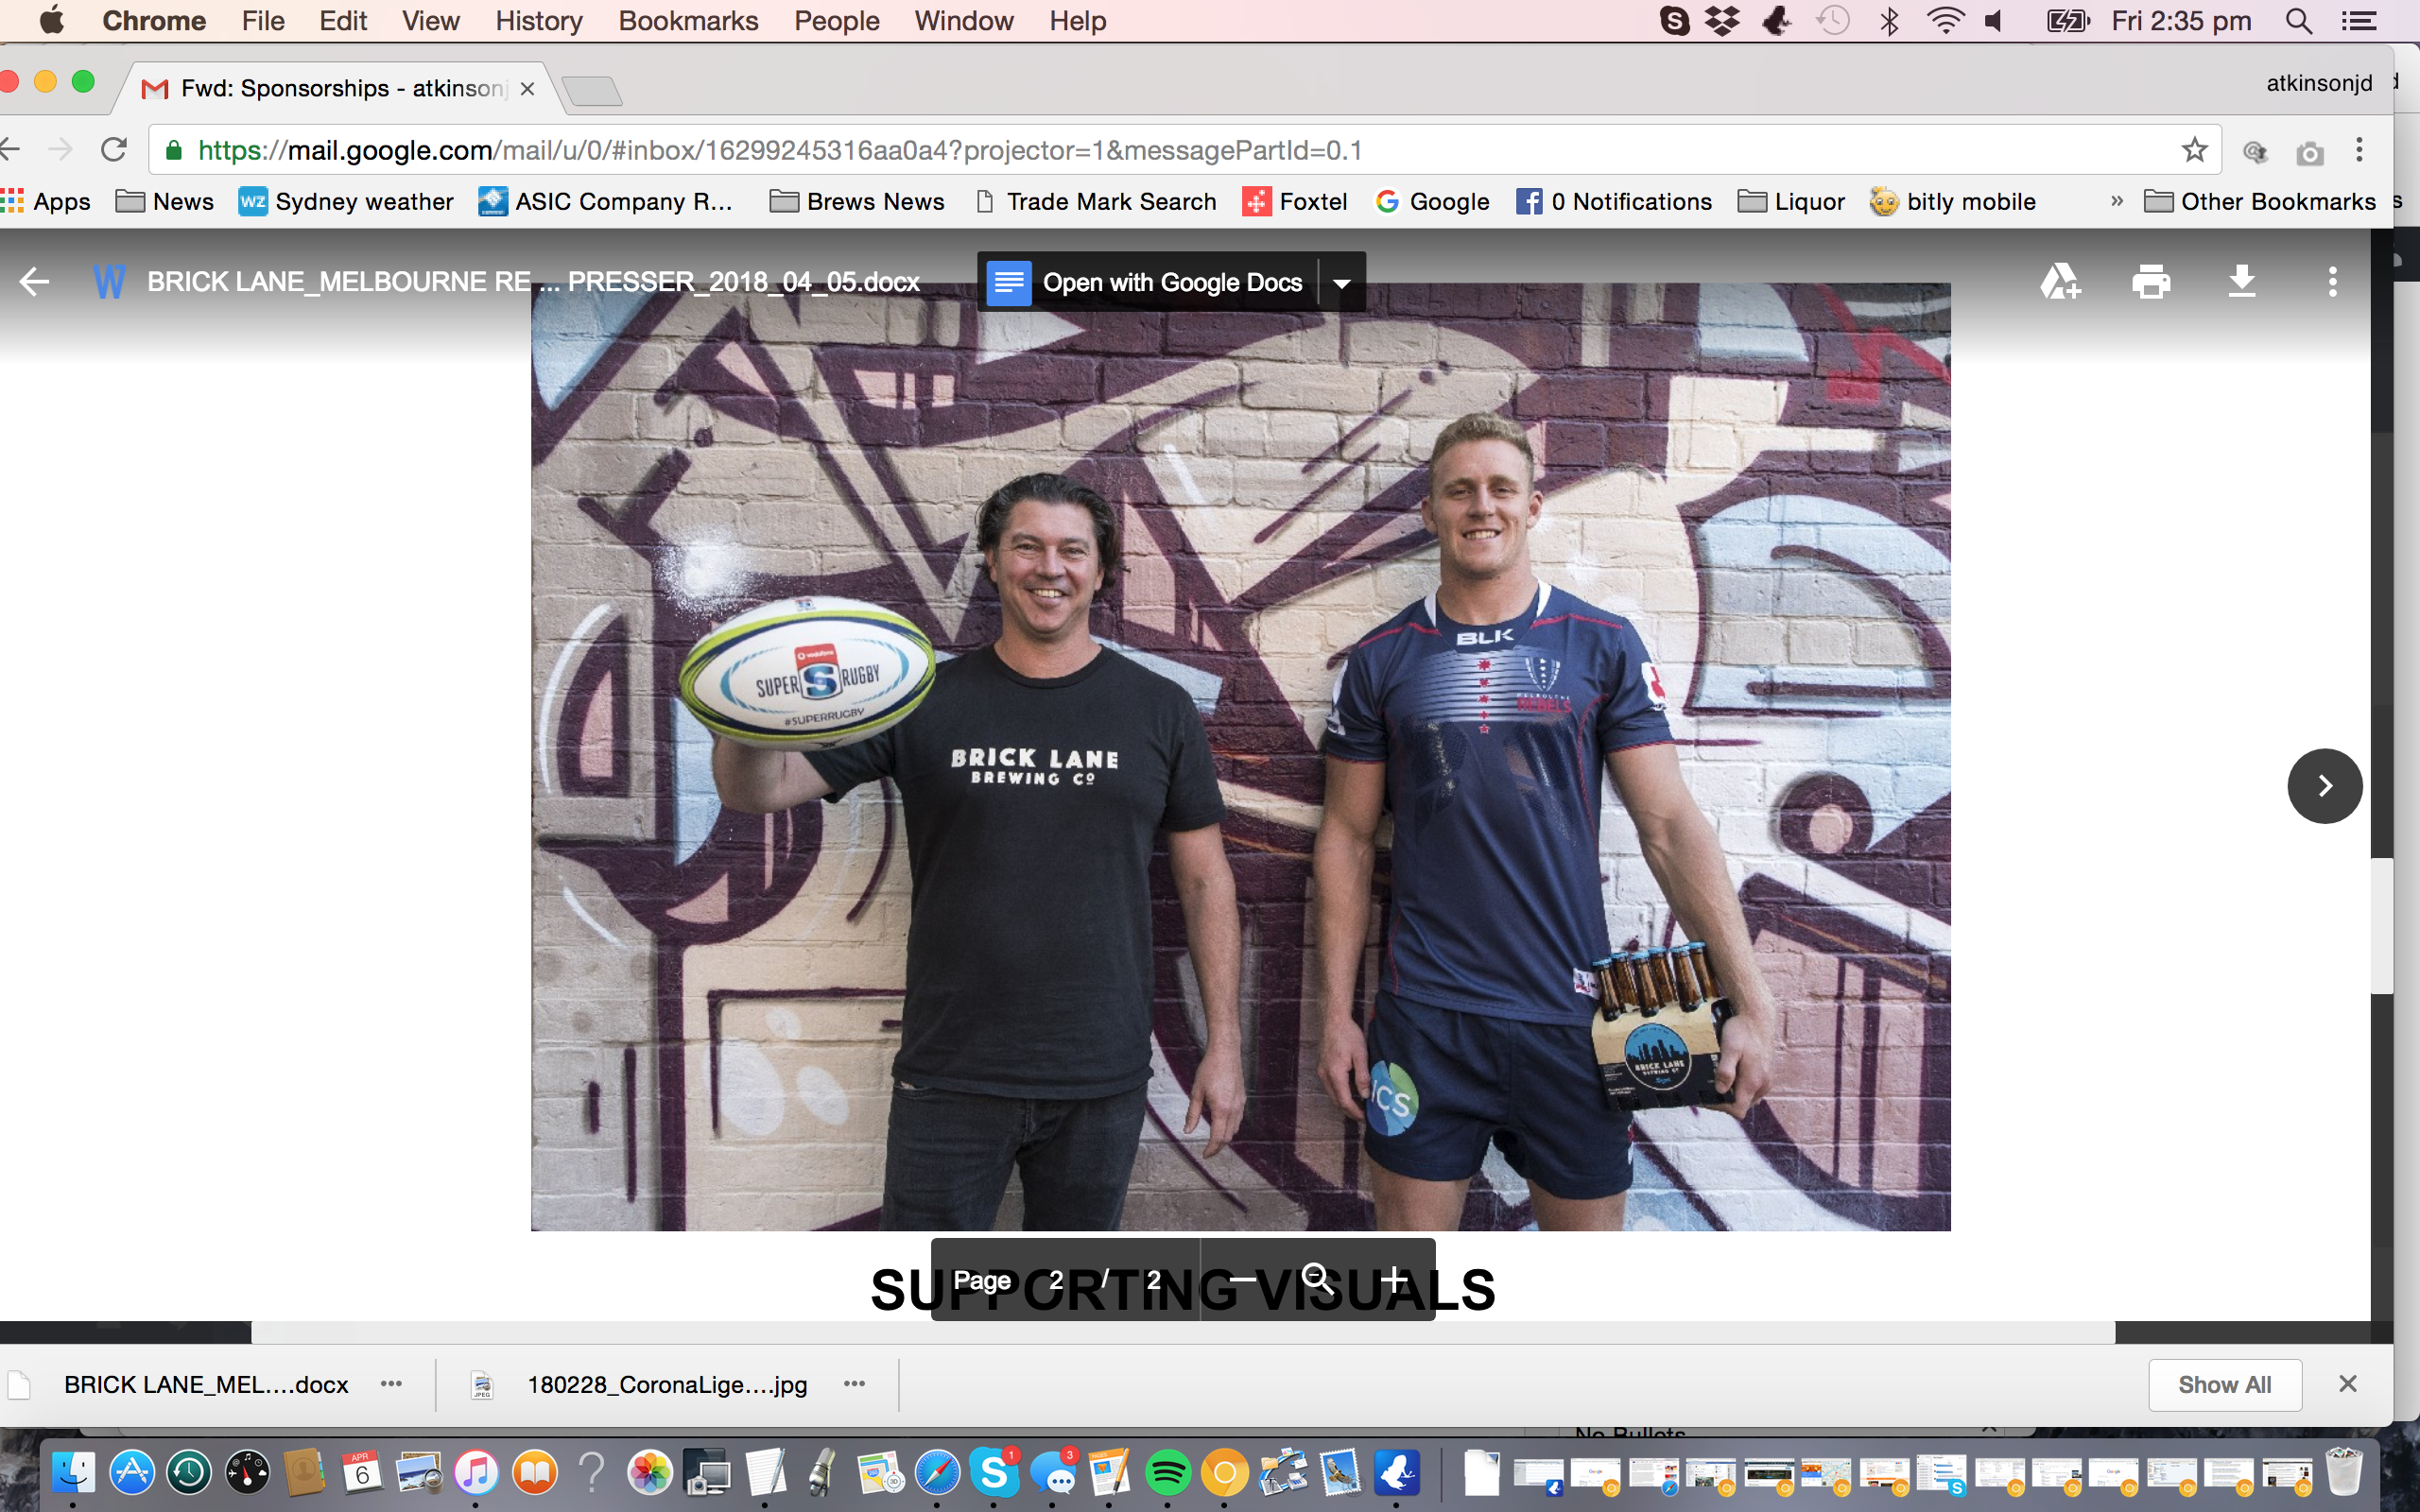 Brick Lane co-founder Paul Bowker celebrates the new partnership with the Melbourne Rebels